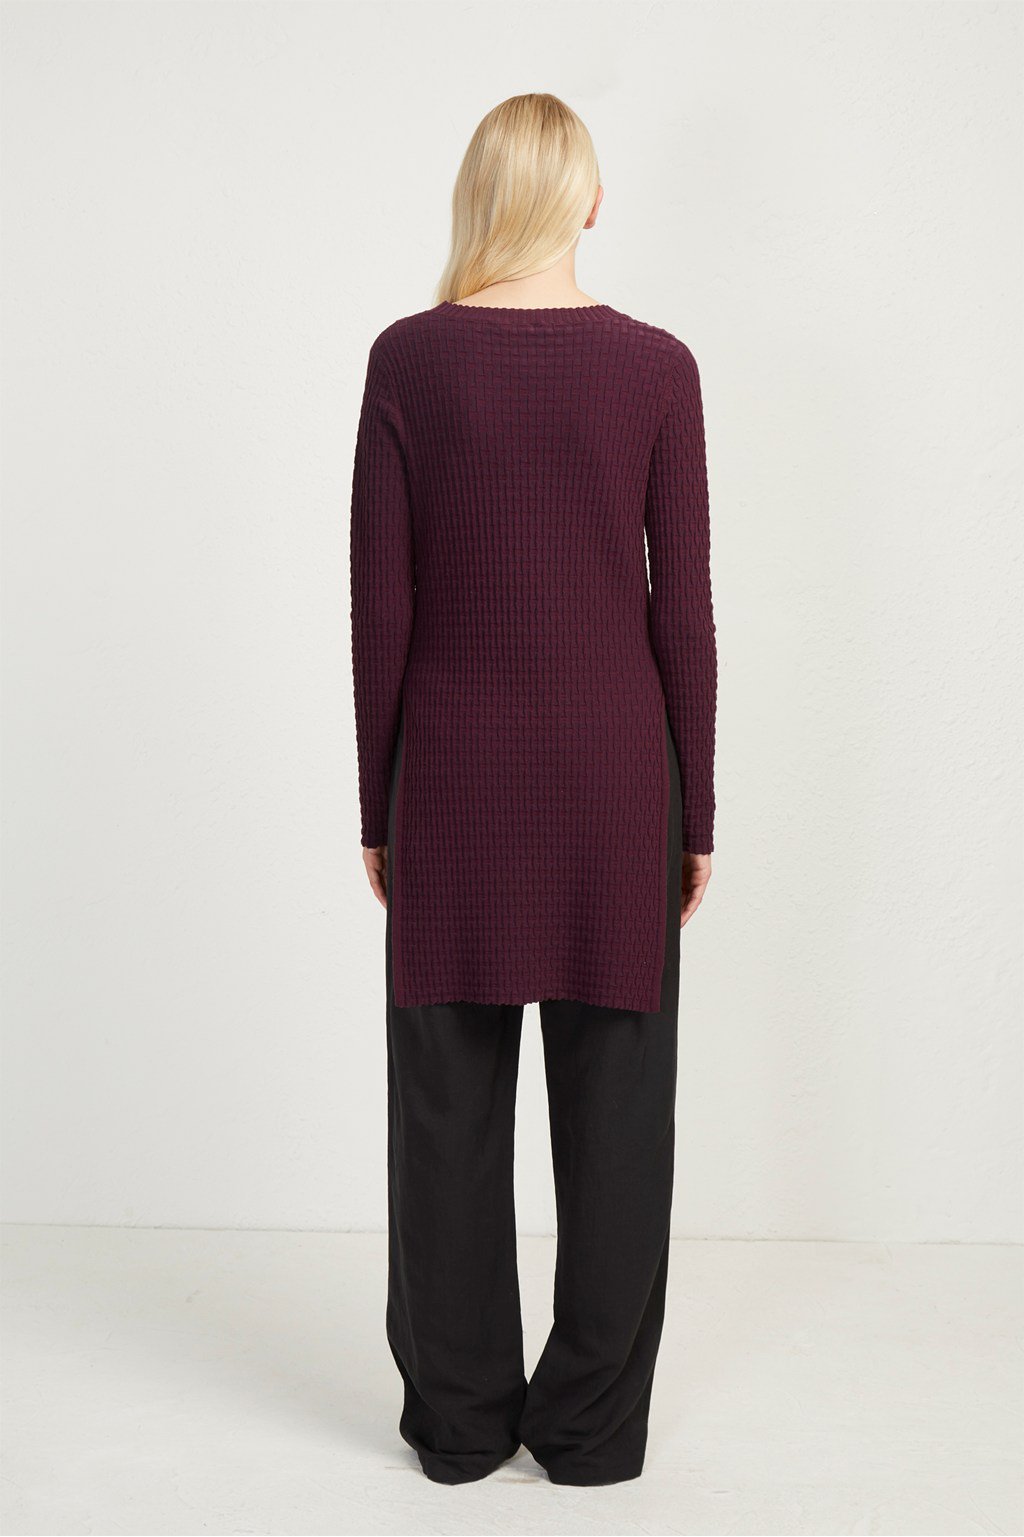 French Connection Relie Tunic in Plum